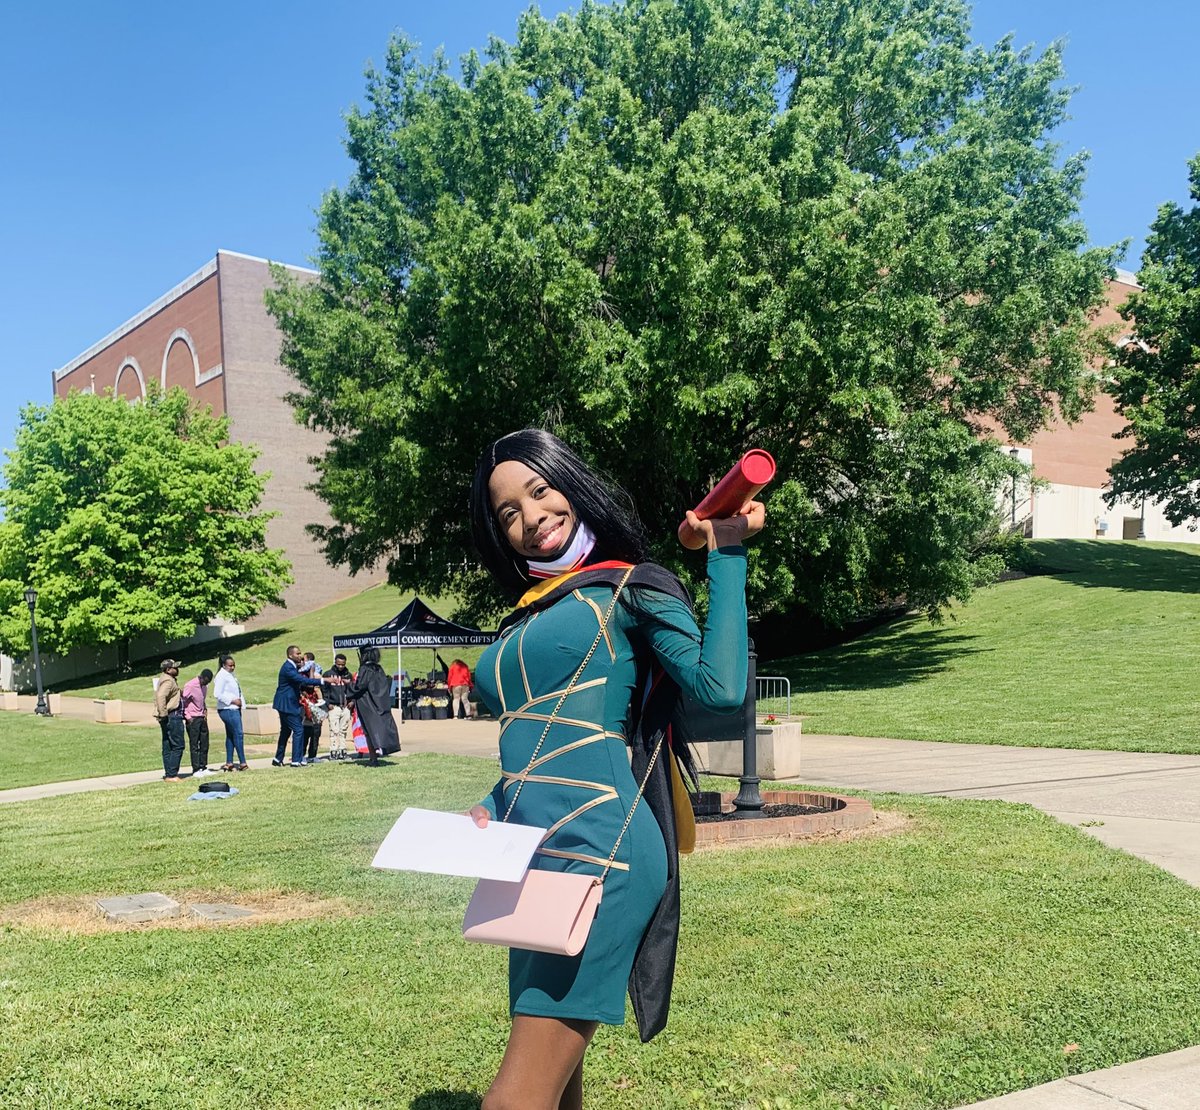 MSc Computer Science and Quantitative Methods with Honor🎓👩🏽‍🎓in the bag 

Baby girl did it 🤩🤩

A journey worthwhile!!! Thank you @austinpeay